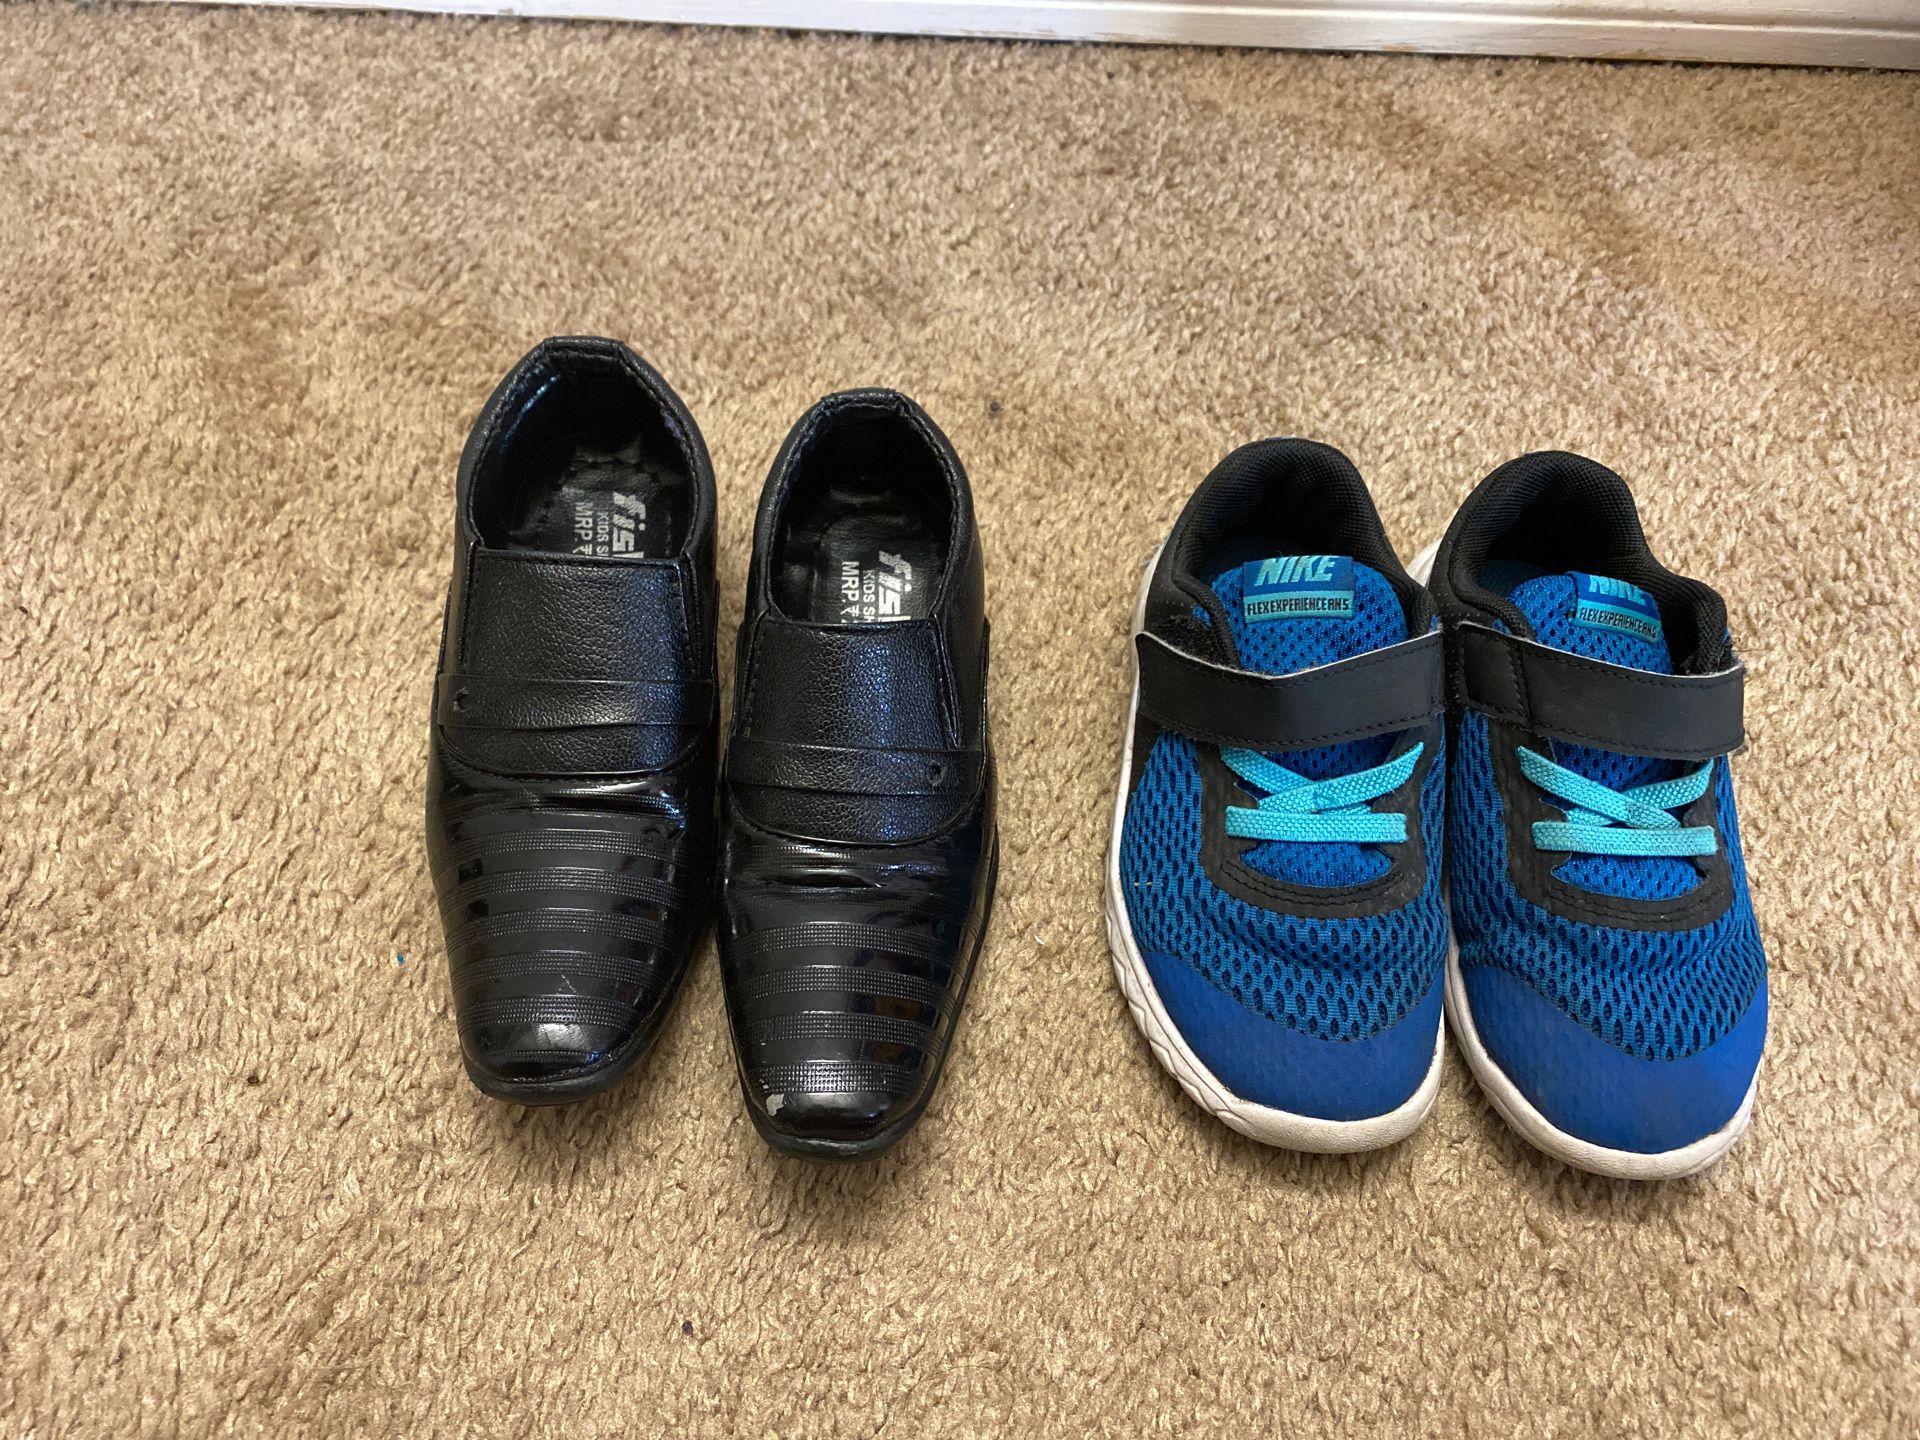 Shoes for 3-4 year kids